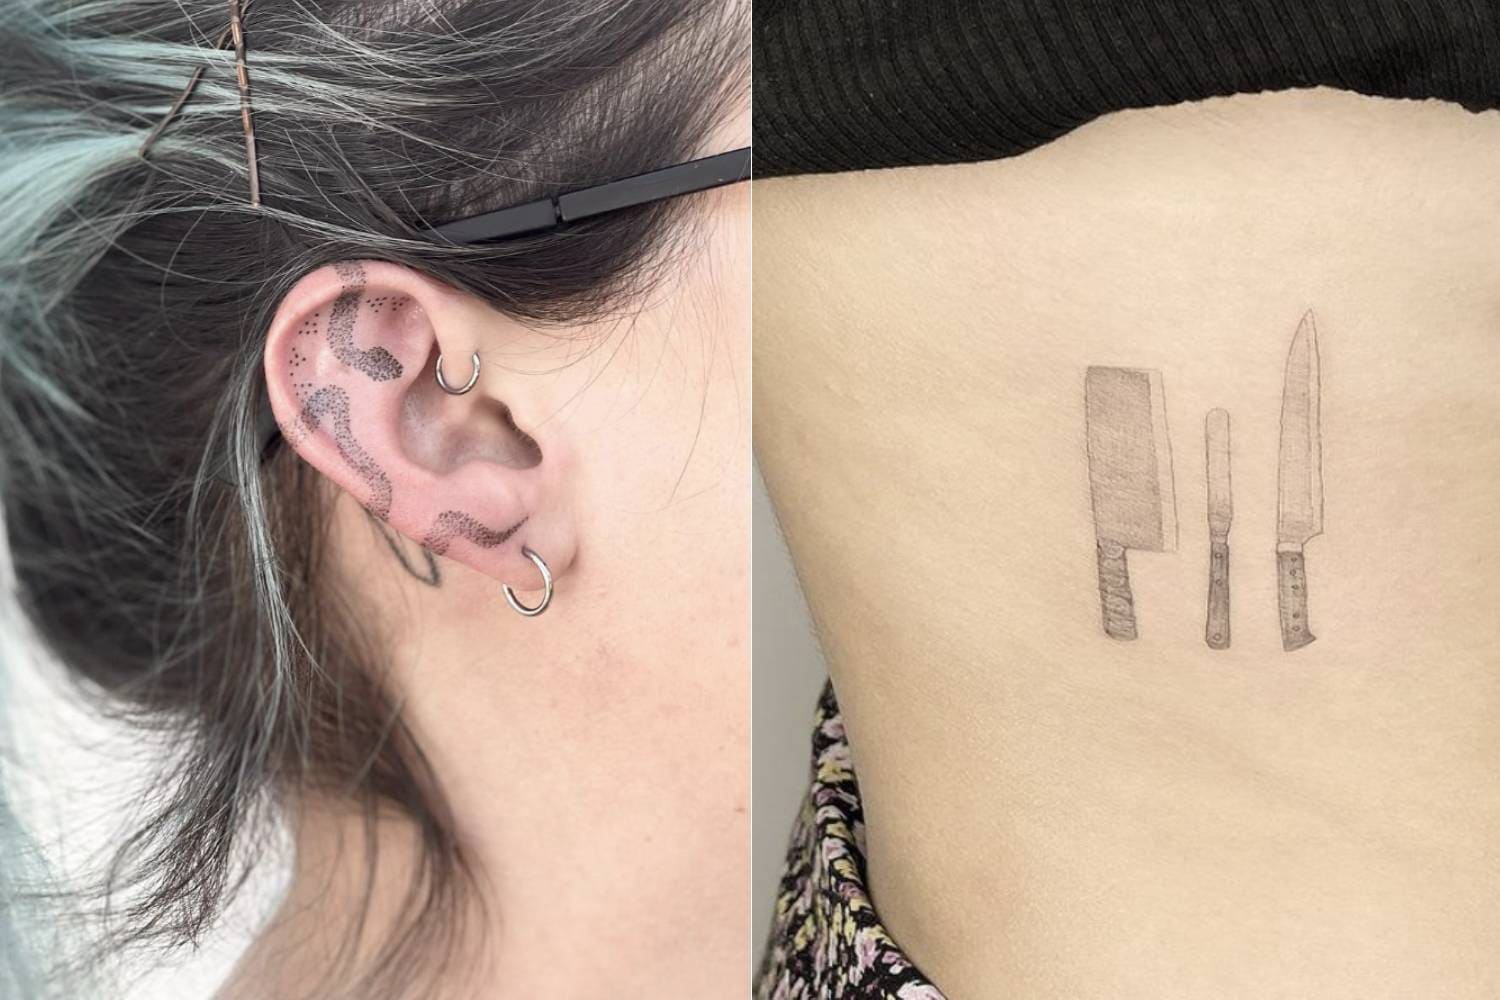 26 Small Tattoo Ideas If You're Afraid Of Commitment But Want A Tattoo